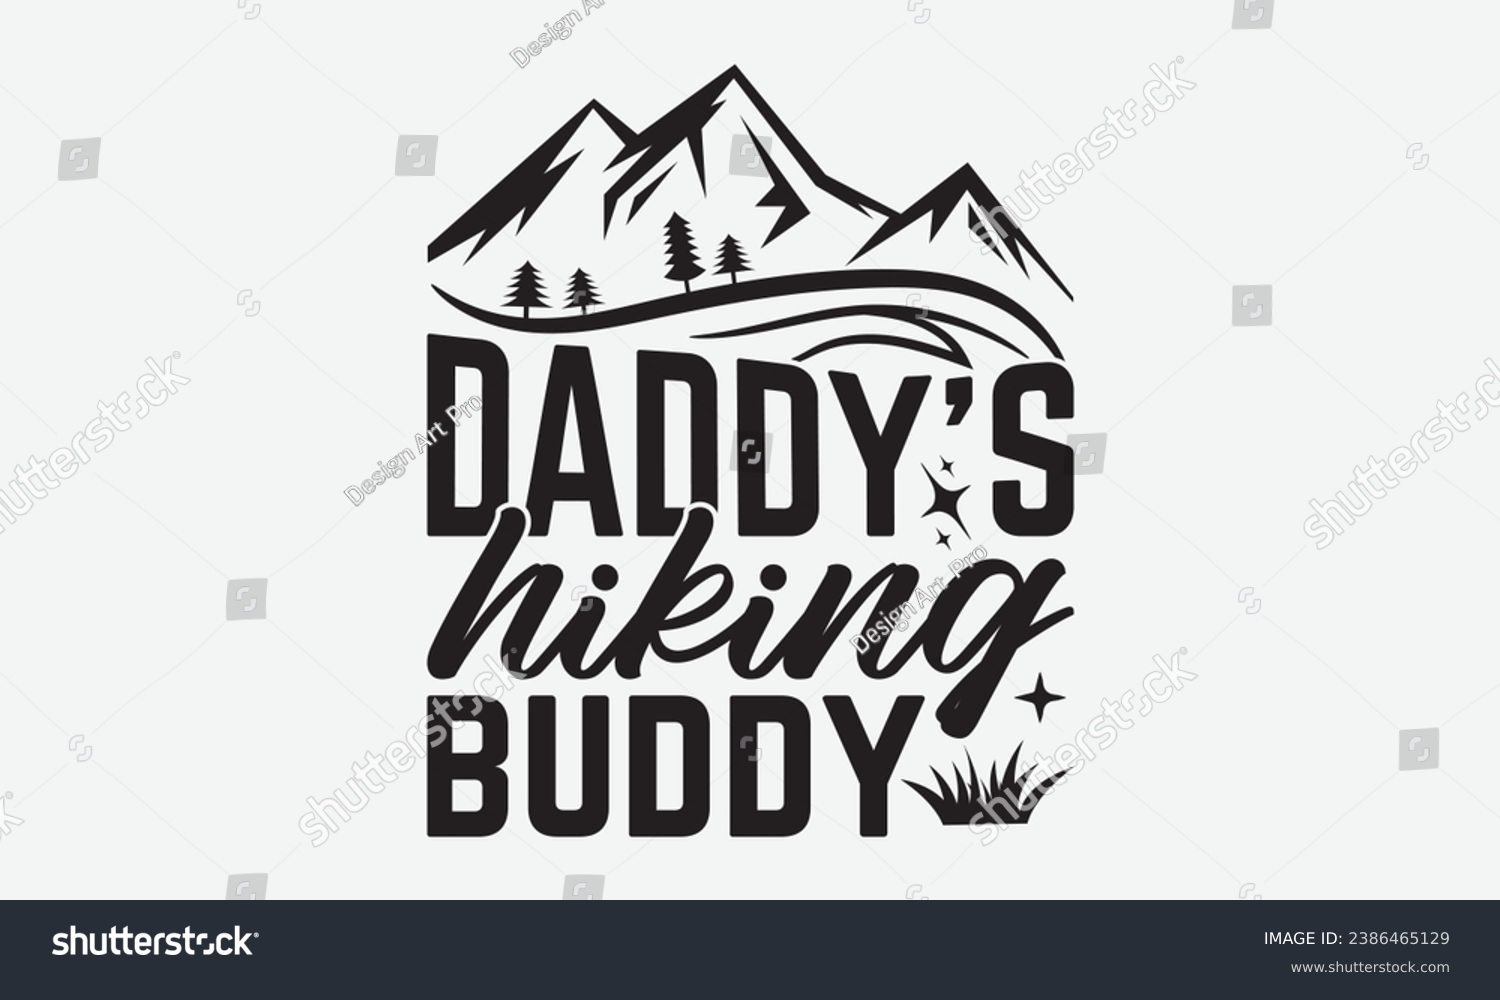 SVG of Daddy’s hiking buddy -Camping T-Shirt Design, Vintage Calligraphy Design, With Notebooks, Pillows, Stickers, Mugs And Others Print. svg